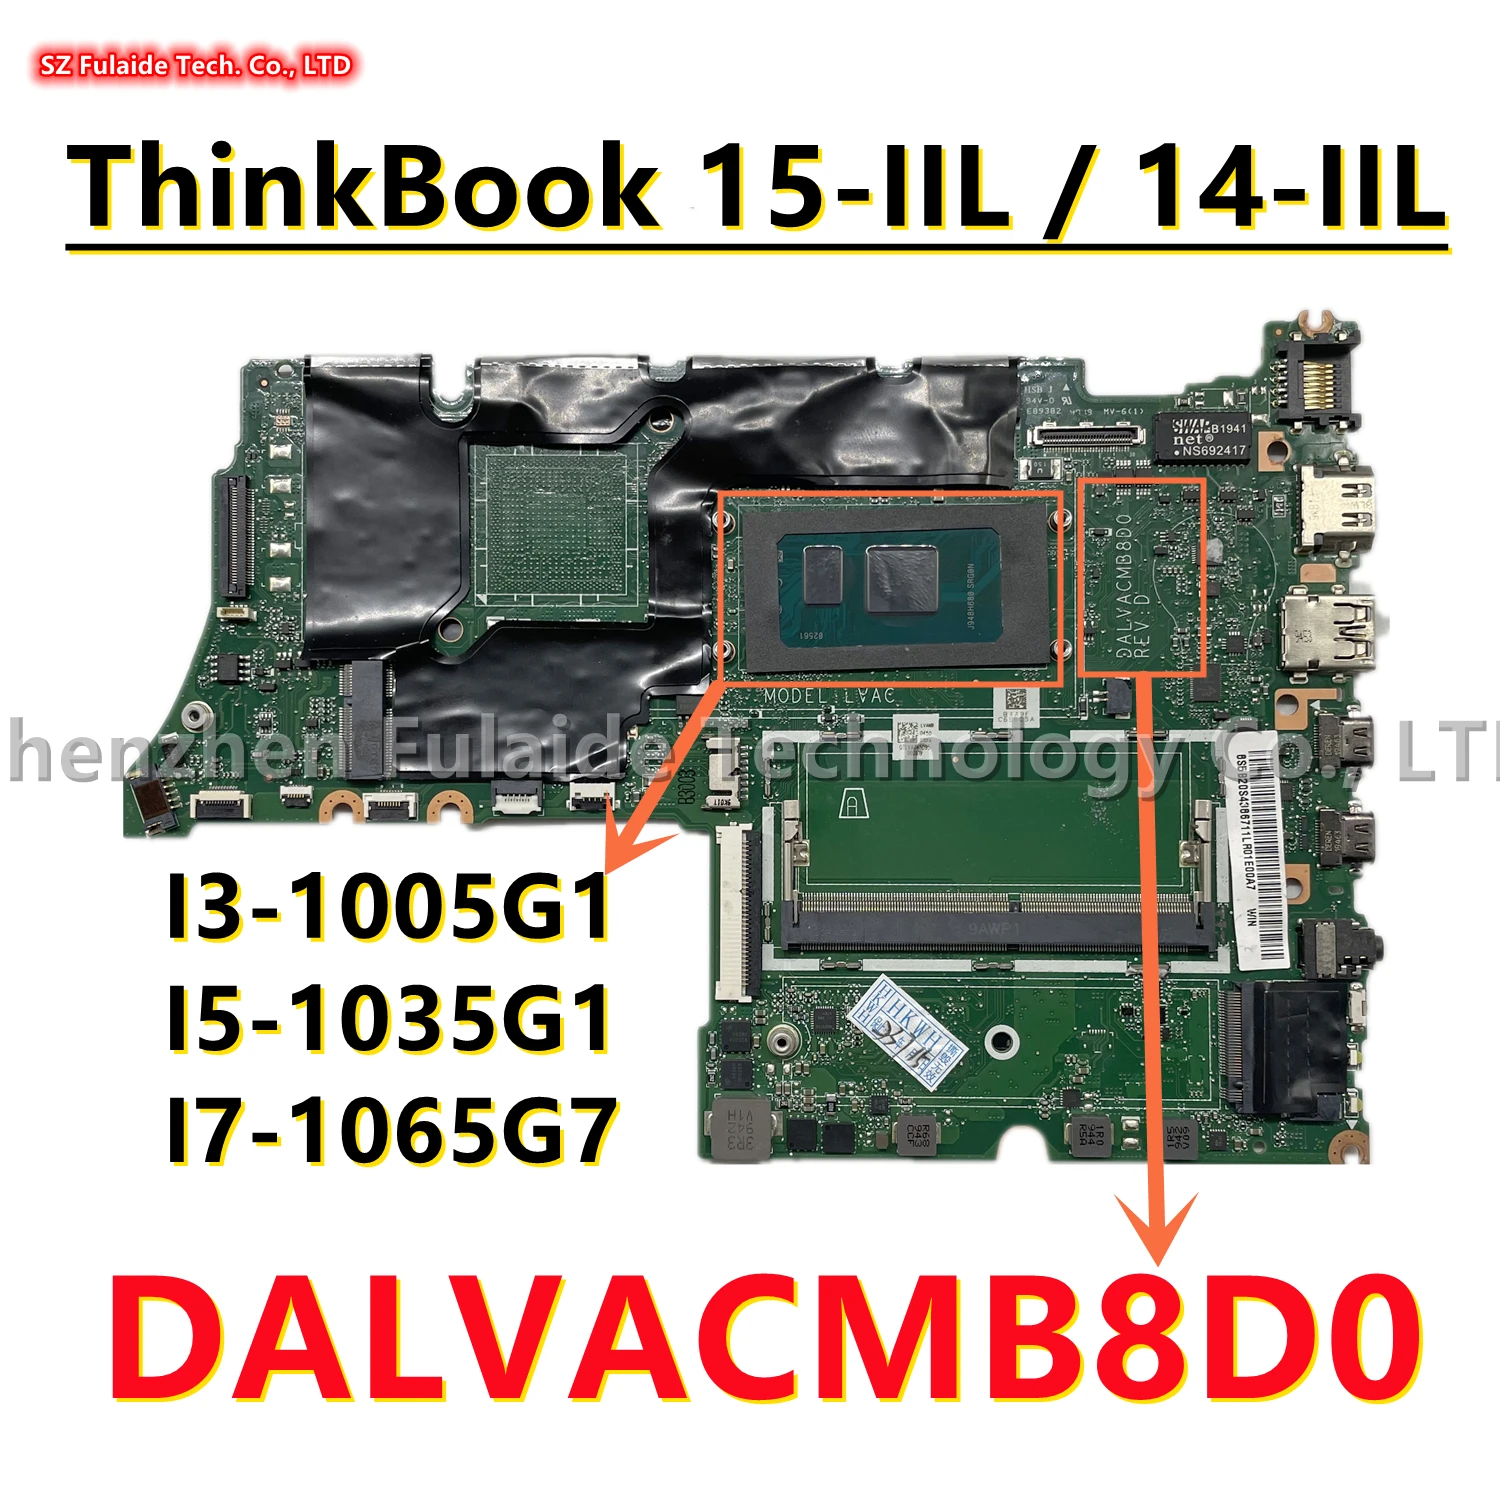 

DALVACMB8D0 For Lenovo ThinkBook 15-IIL / 14-IIL Laptop Motherboard With I3-1005G1 I5-1035G1 I7-1065G7 CPU 100% Work